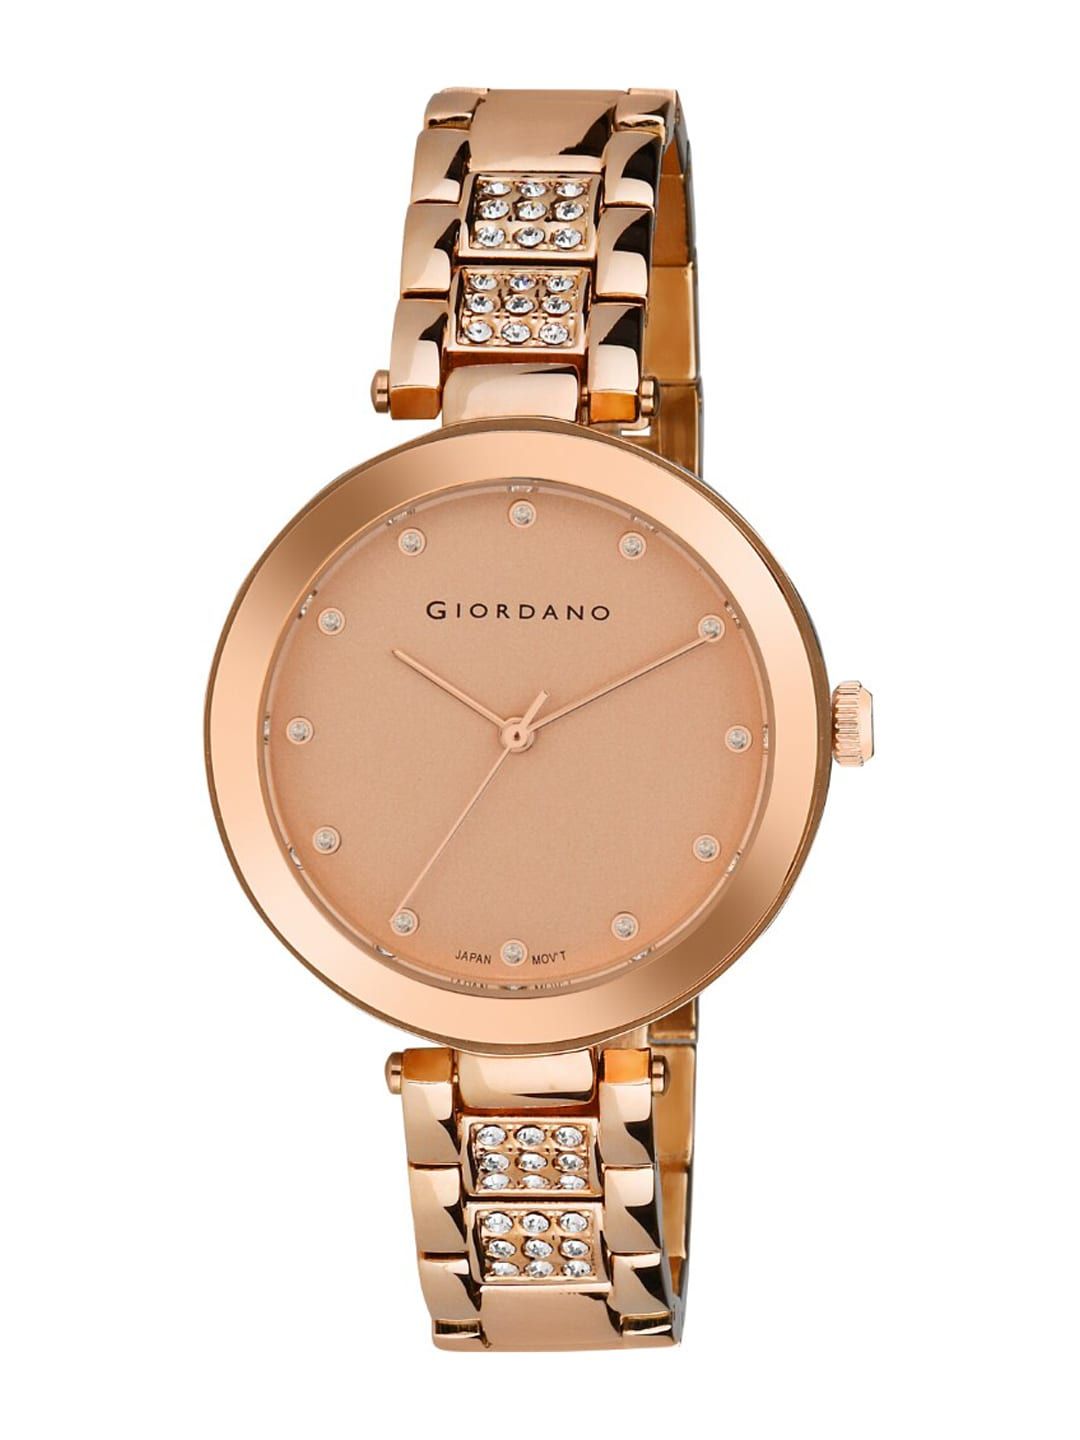 GIORDANO Women Rose Gold-Toned Brass Embellished Dial Analogue Watch A2037-55 Price in India